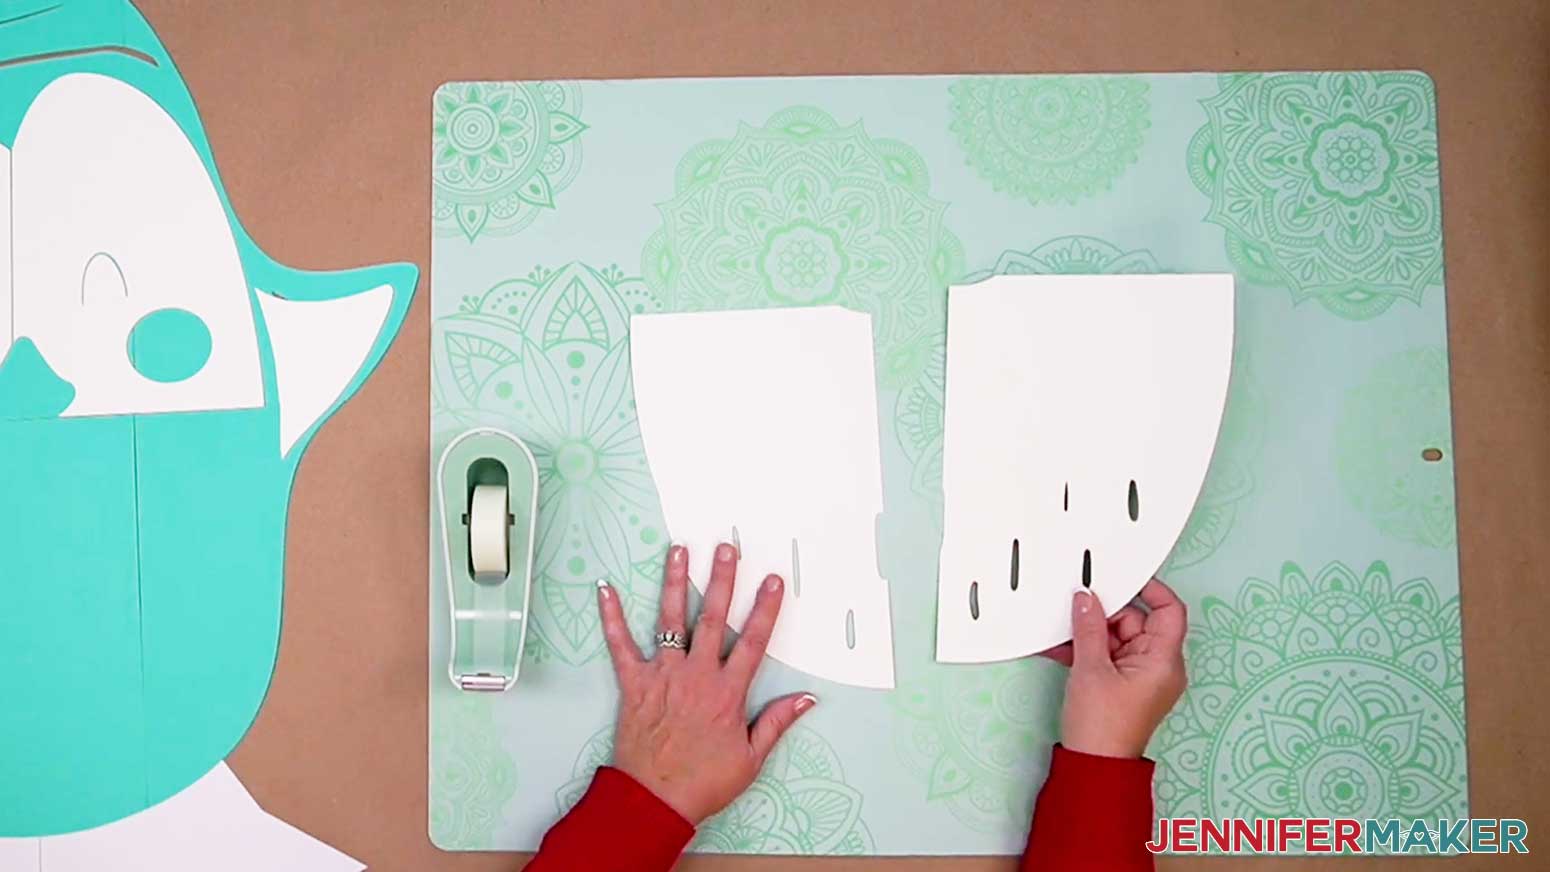 Flipping over the DIY Cut Out Characters’ large white body pieces two at a time.